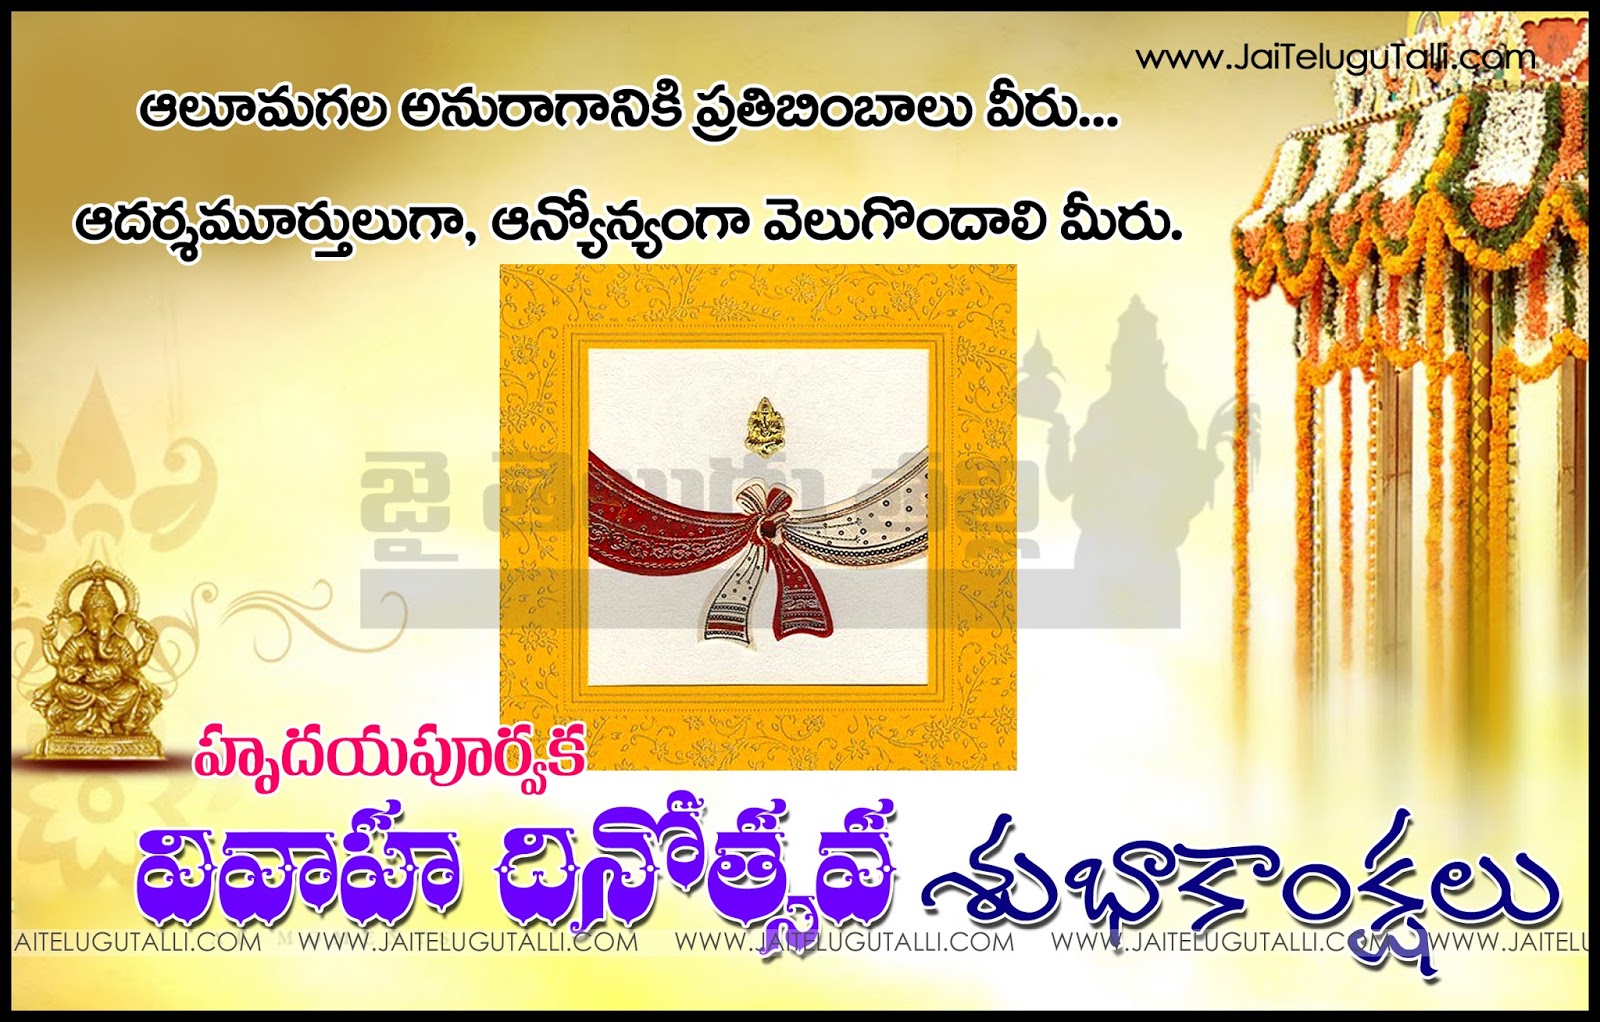 Happy Married Greetings Wallpapers and Telugu Quotes